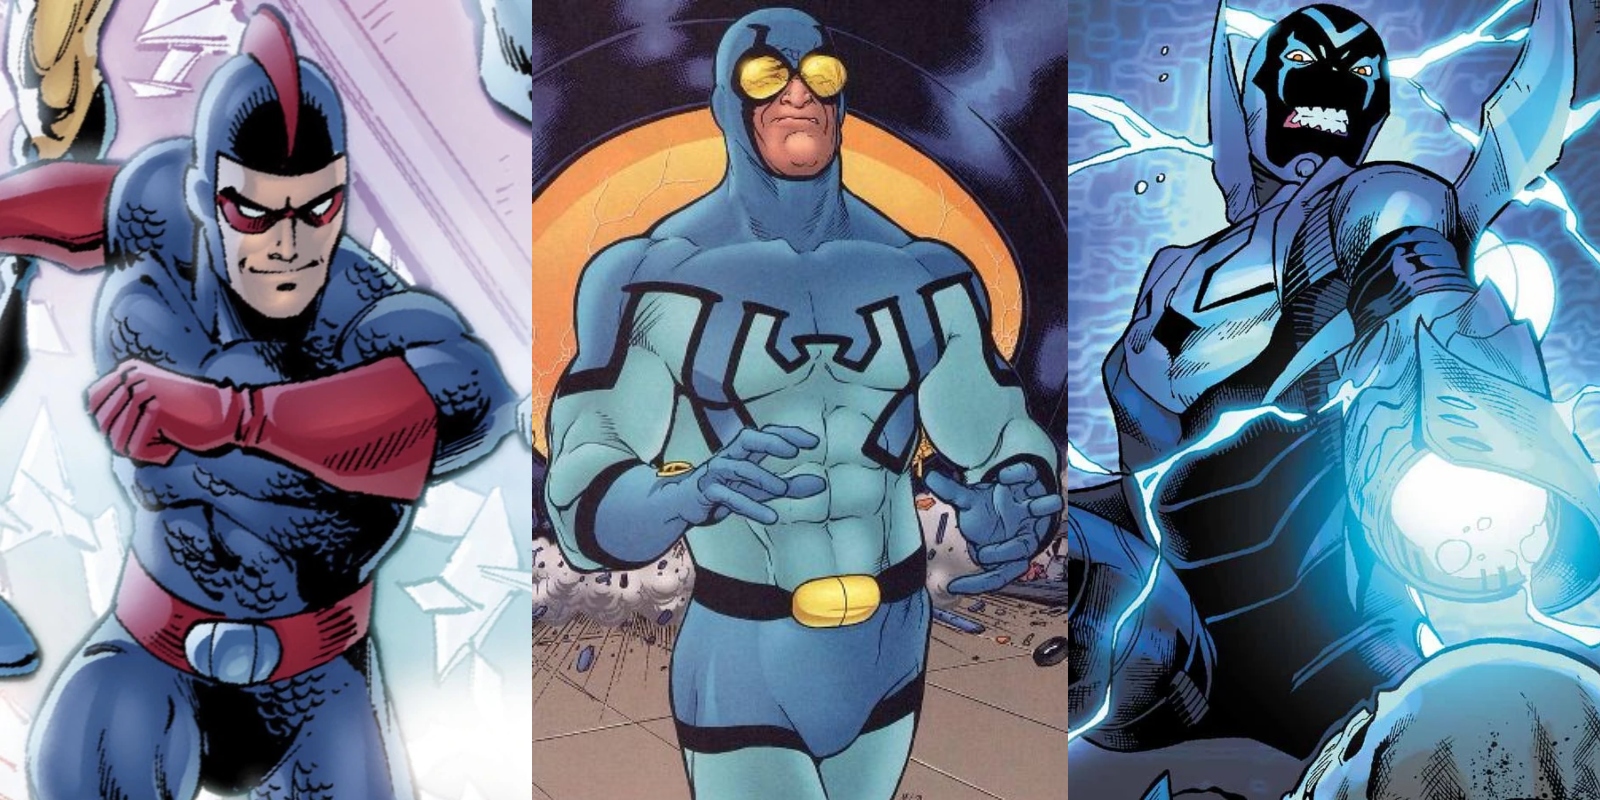 Blue Beetle 2′: Its Potential Release Date, Likely Cast And Plot